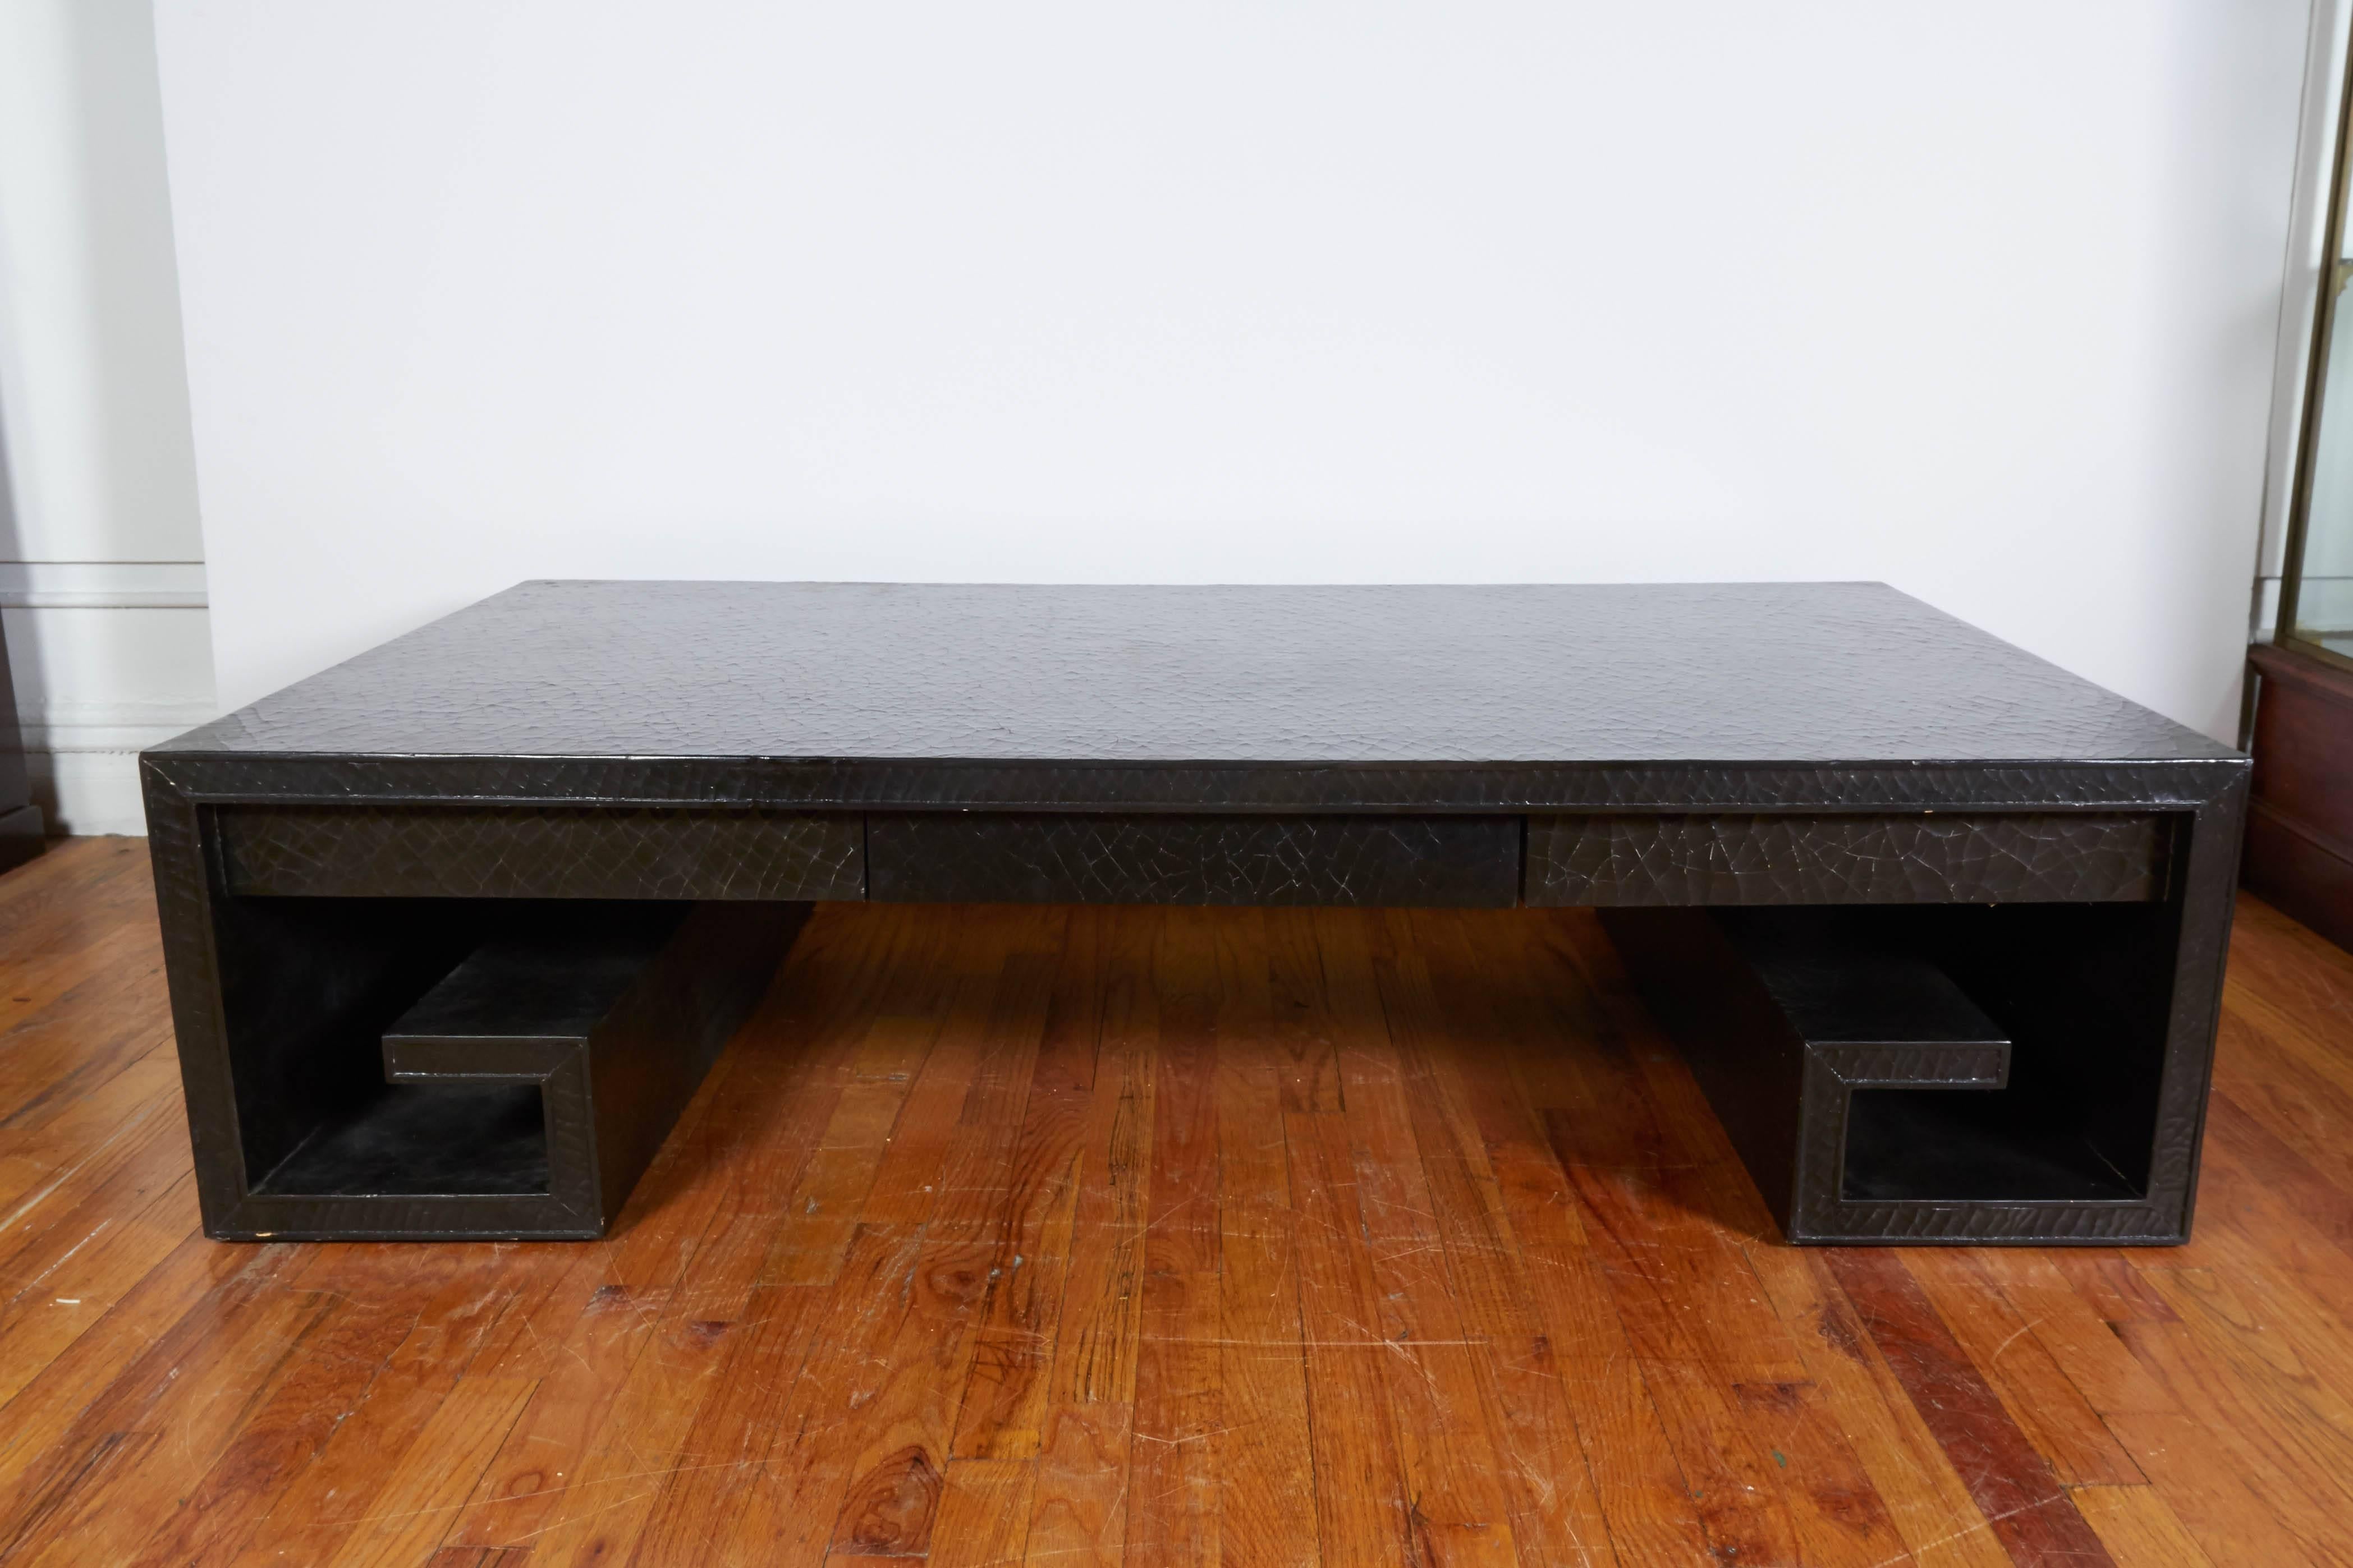 A Greek key scroll form coffee and cocktail table designed by Thomas Pheasant, manufactured circa 1970s by Baker Furniture Company, entirely with black lacquer finish with crackle detail, with single exterior drawer. Markings include maker's label